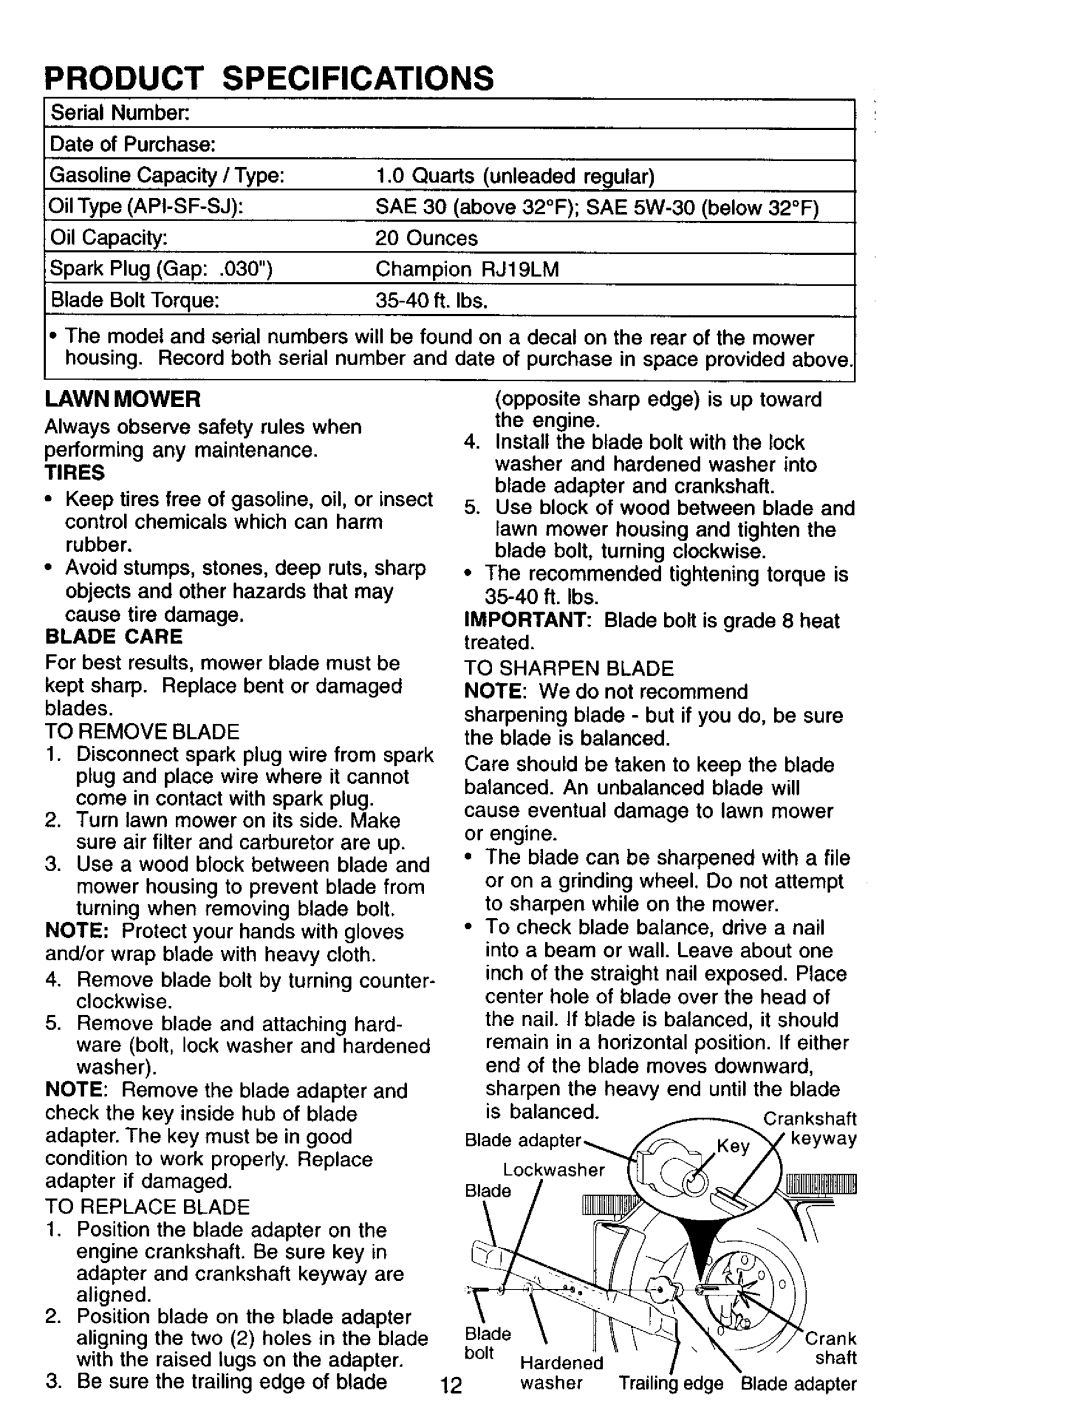 Sears 944.36201 owner manual Product Specifications, Lawn Mower 